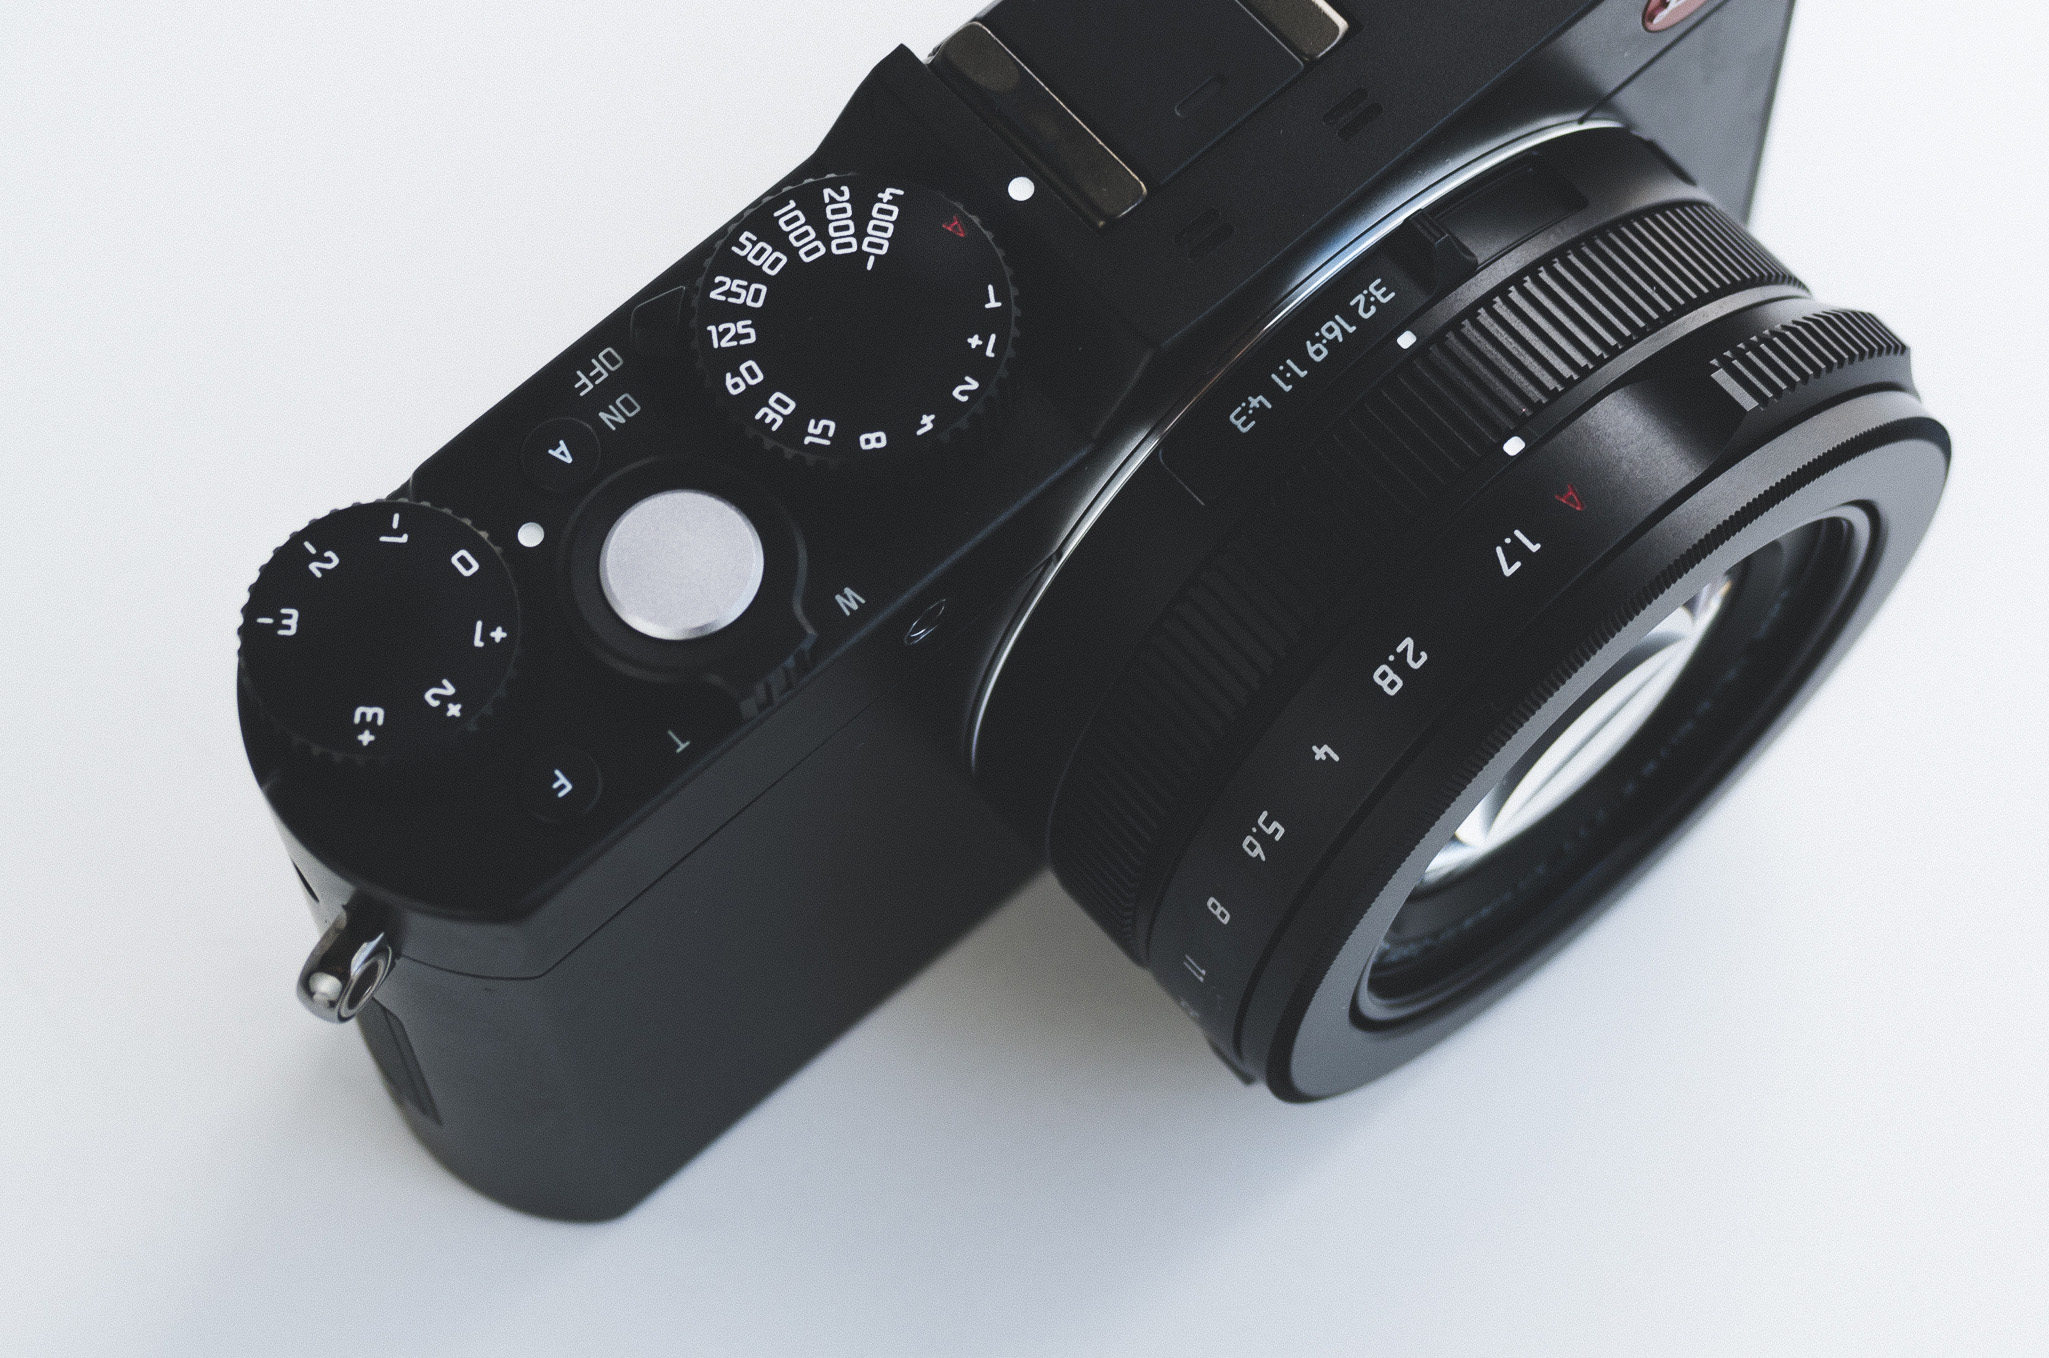 Build and handling - Leica D-Lux (Typ 109) review - Page 2